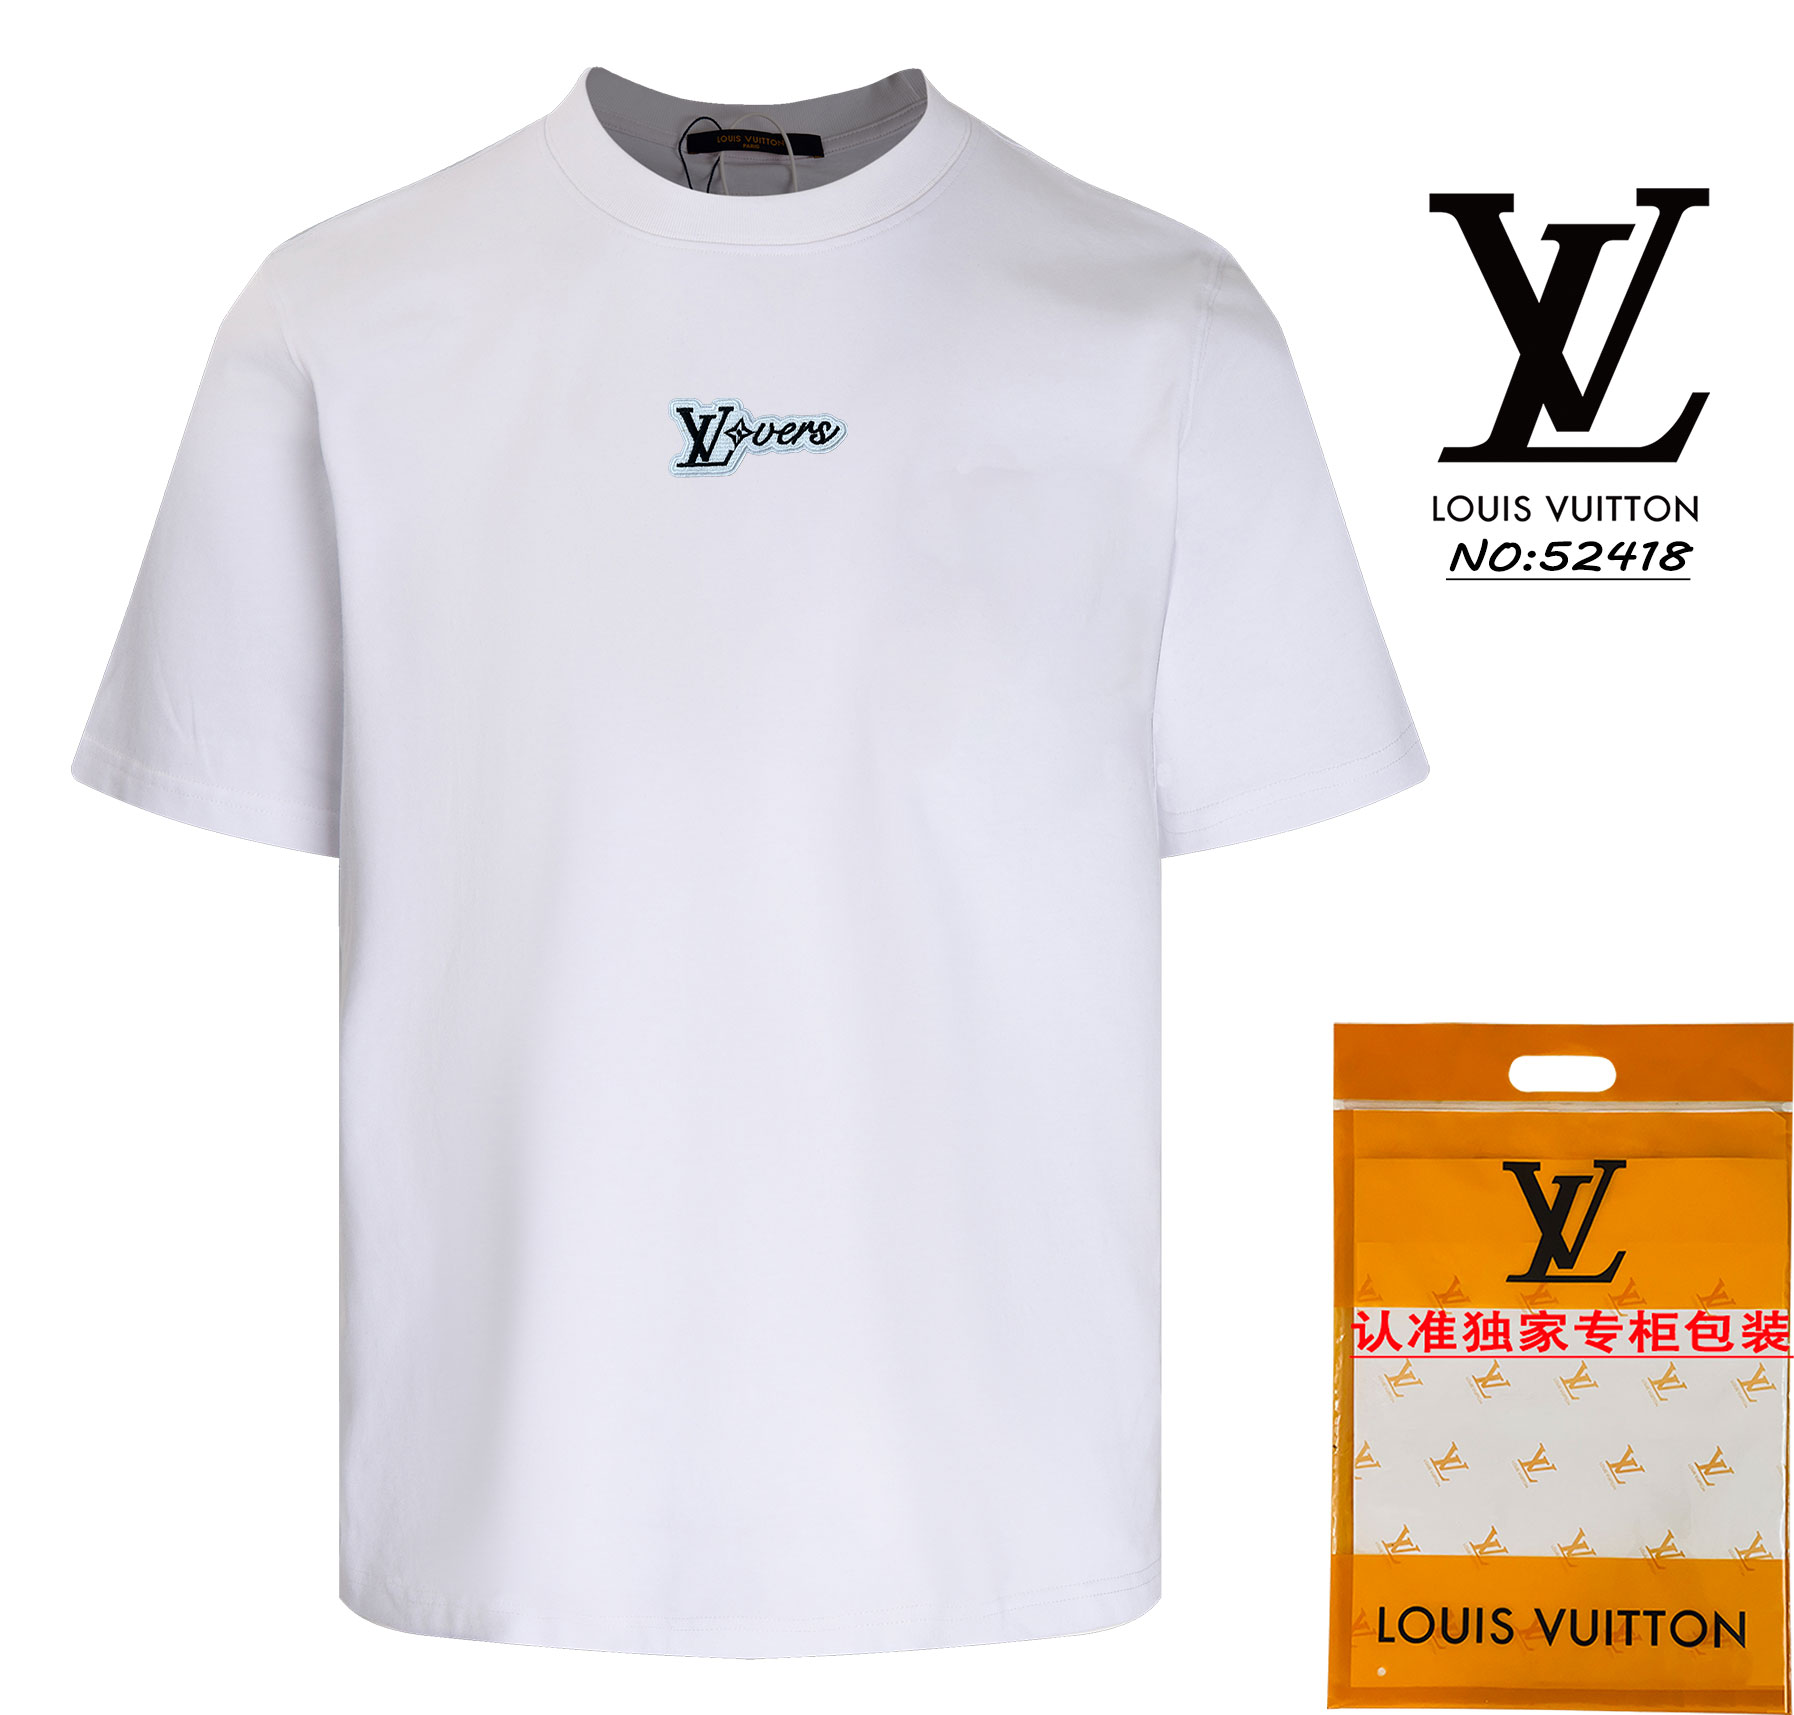 Louis Vuitton Clothing T-Shirt Sell High Quality
 Apricot Color Black White Unisex Short Sleeve